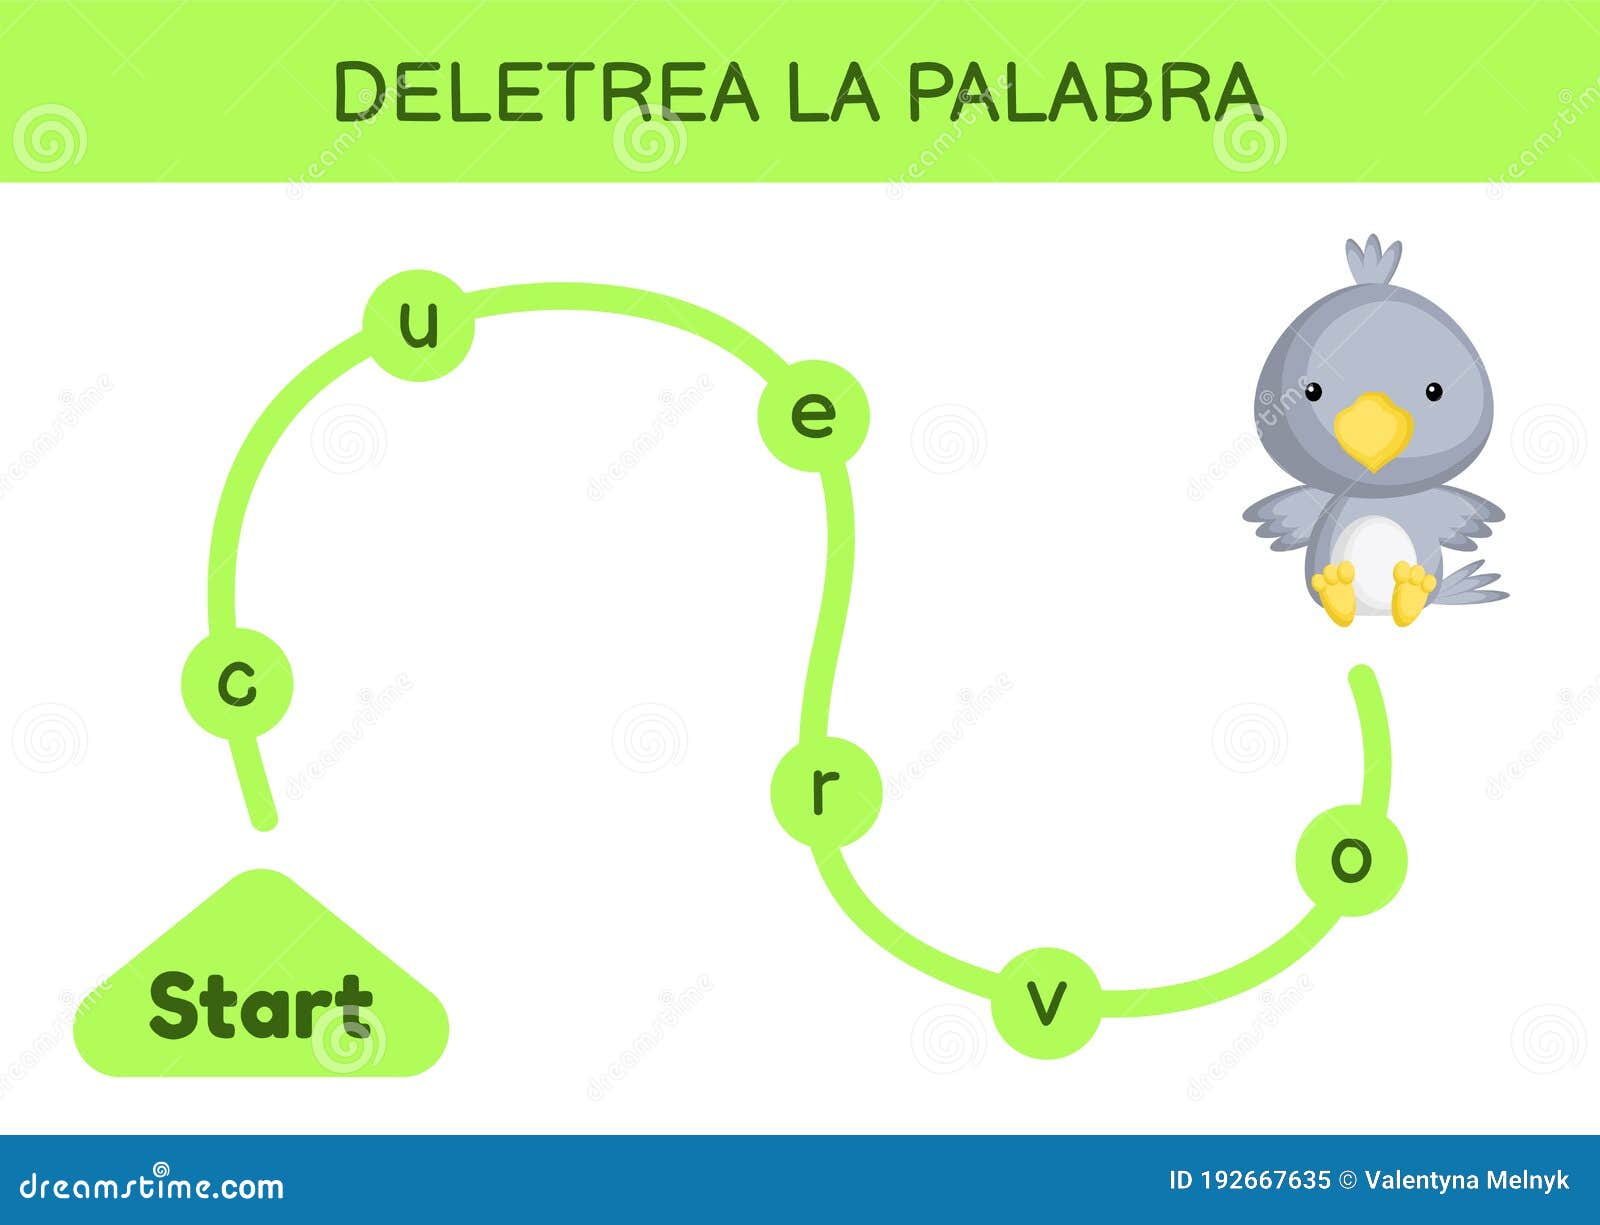 deletrea la palabra - spell the word. maze for kids. spelling word game template. learn to read word raven. activity page for